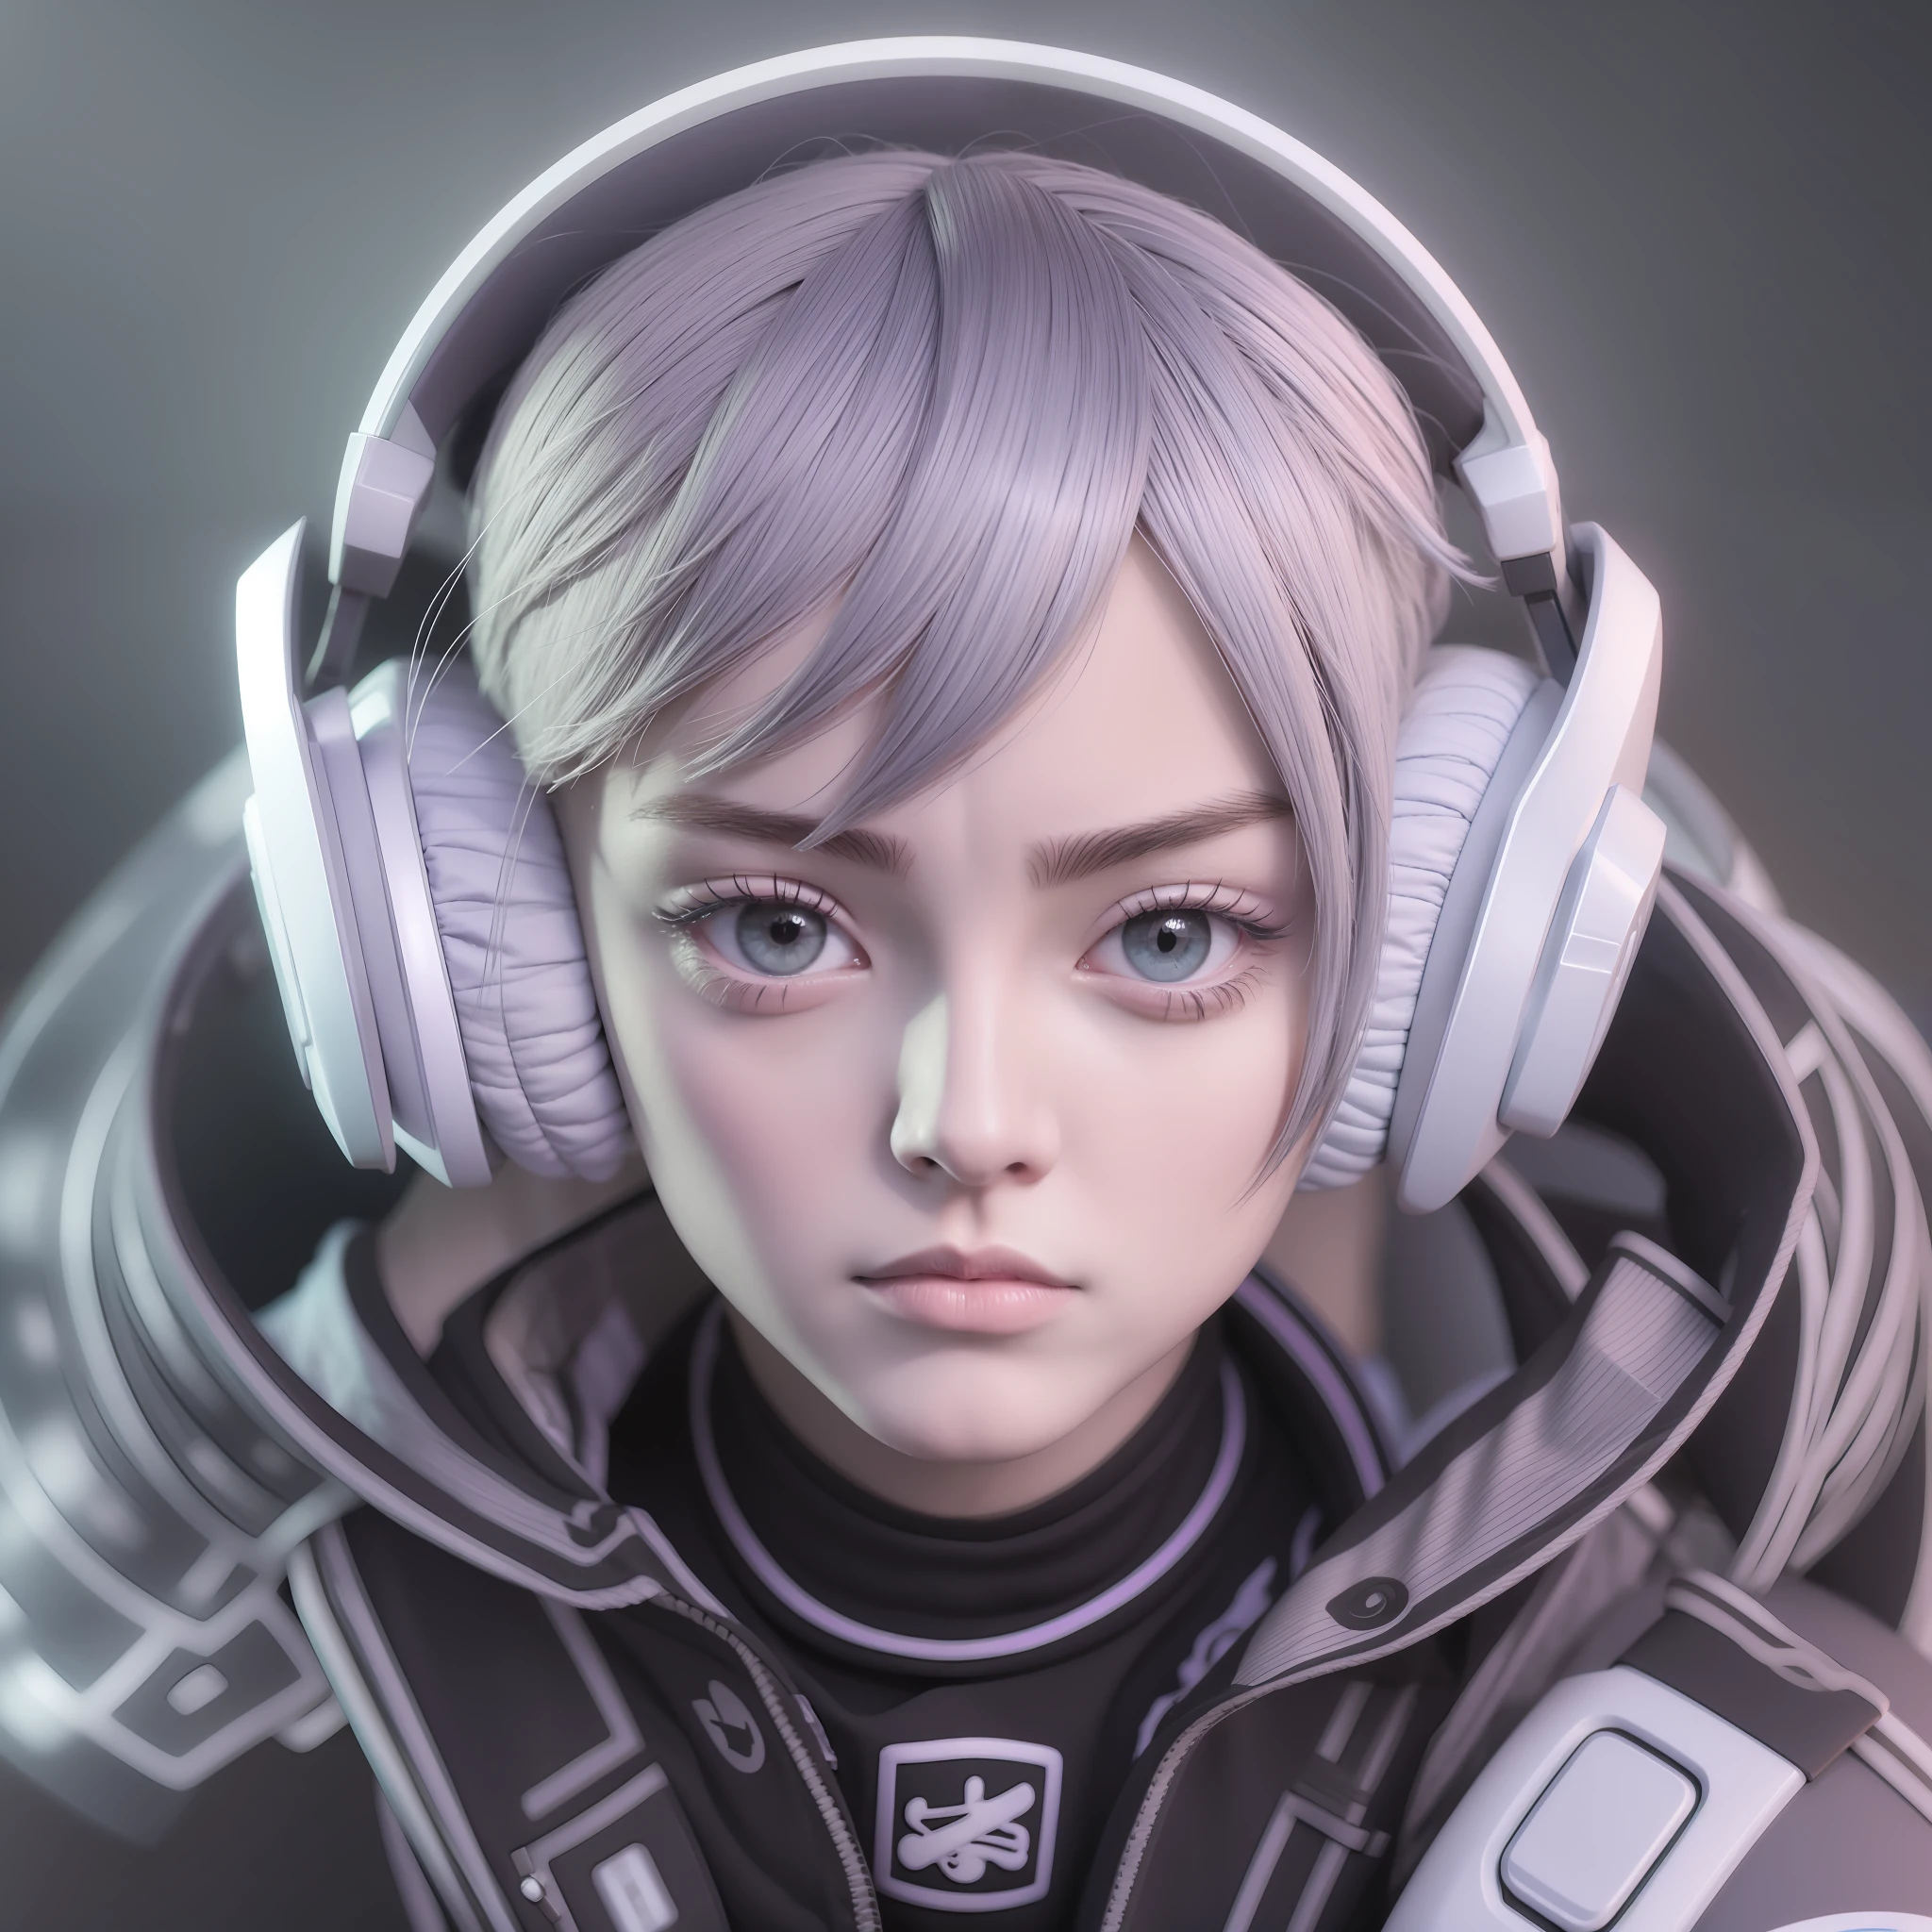 Anime RGB for background on YouTube very beautiful, ultra modern rendering, full RGB, silver hair, gamer headset.